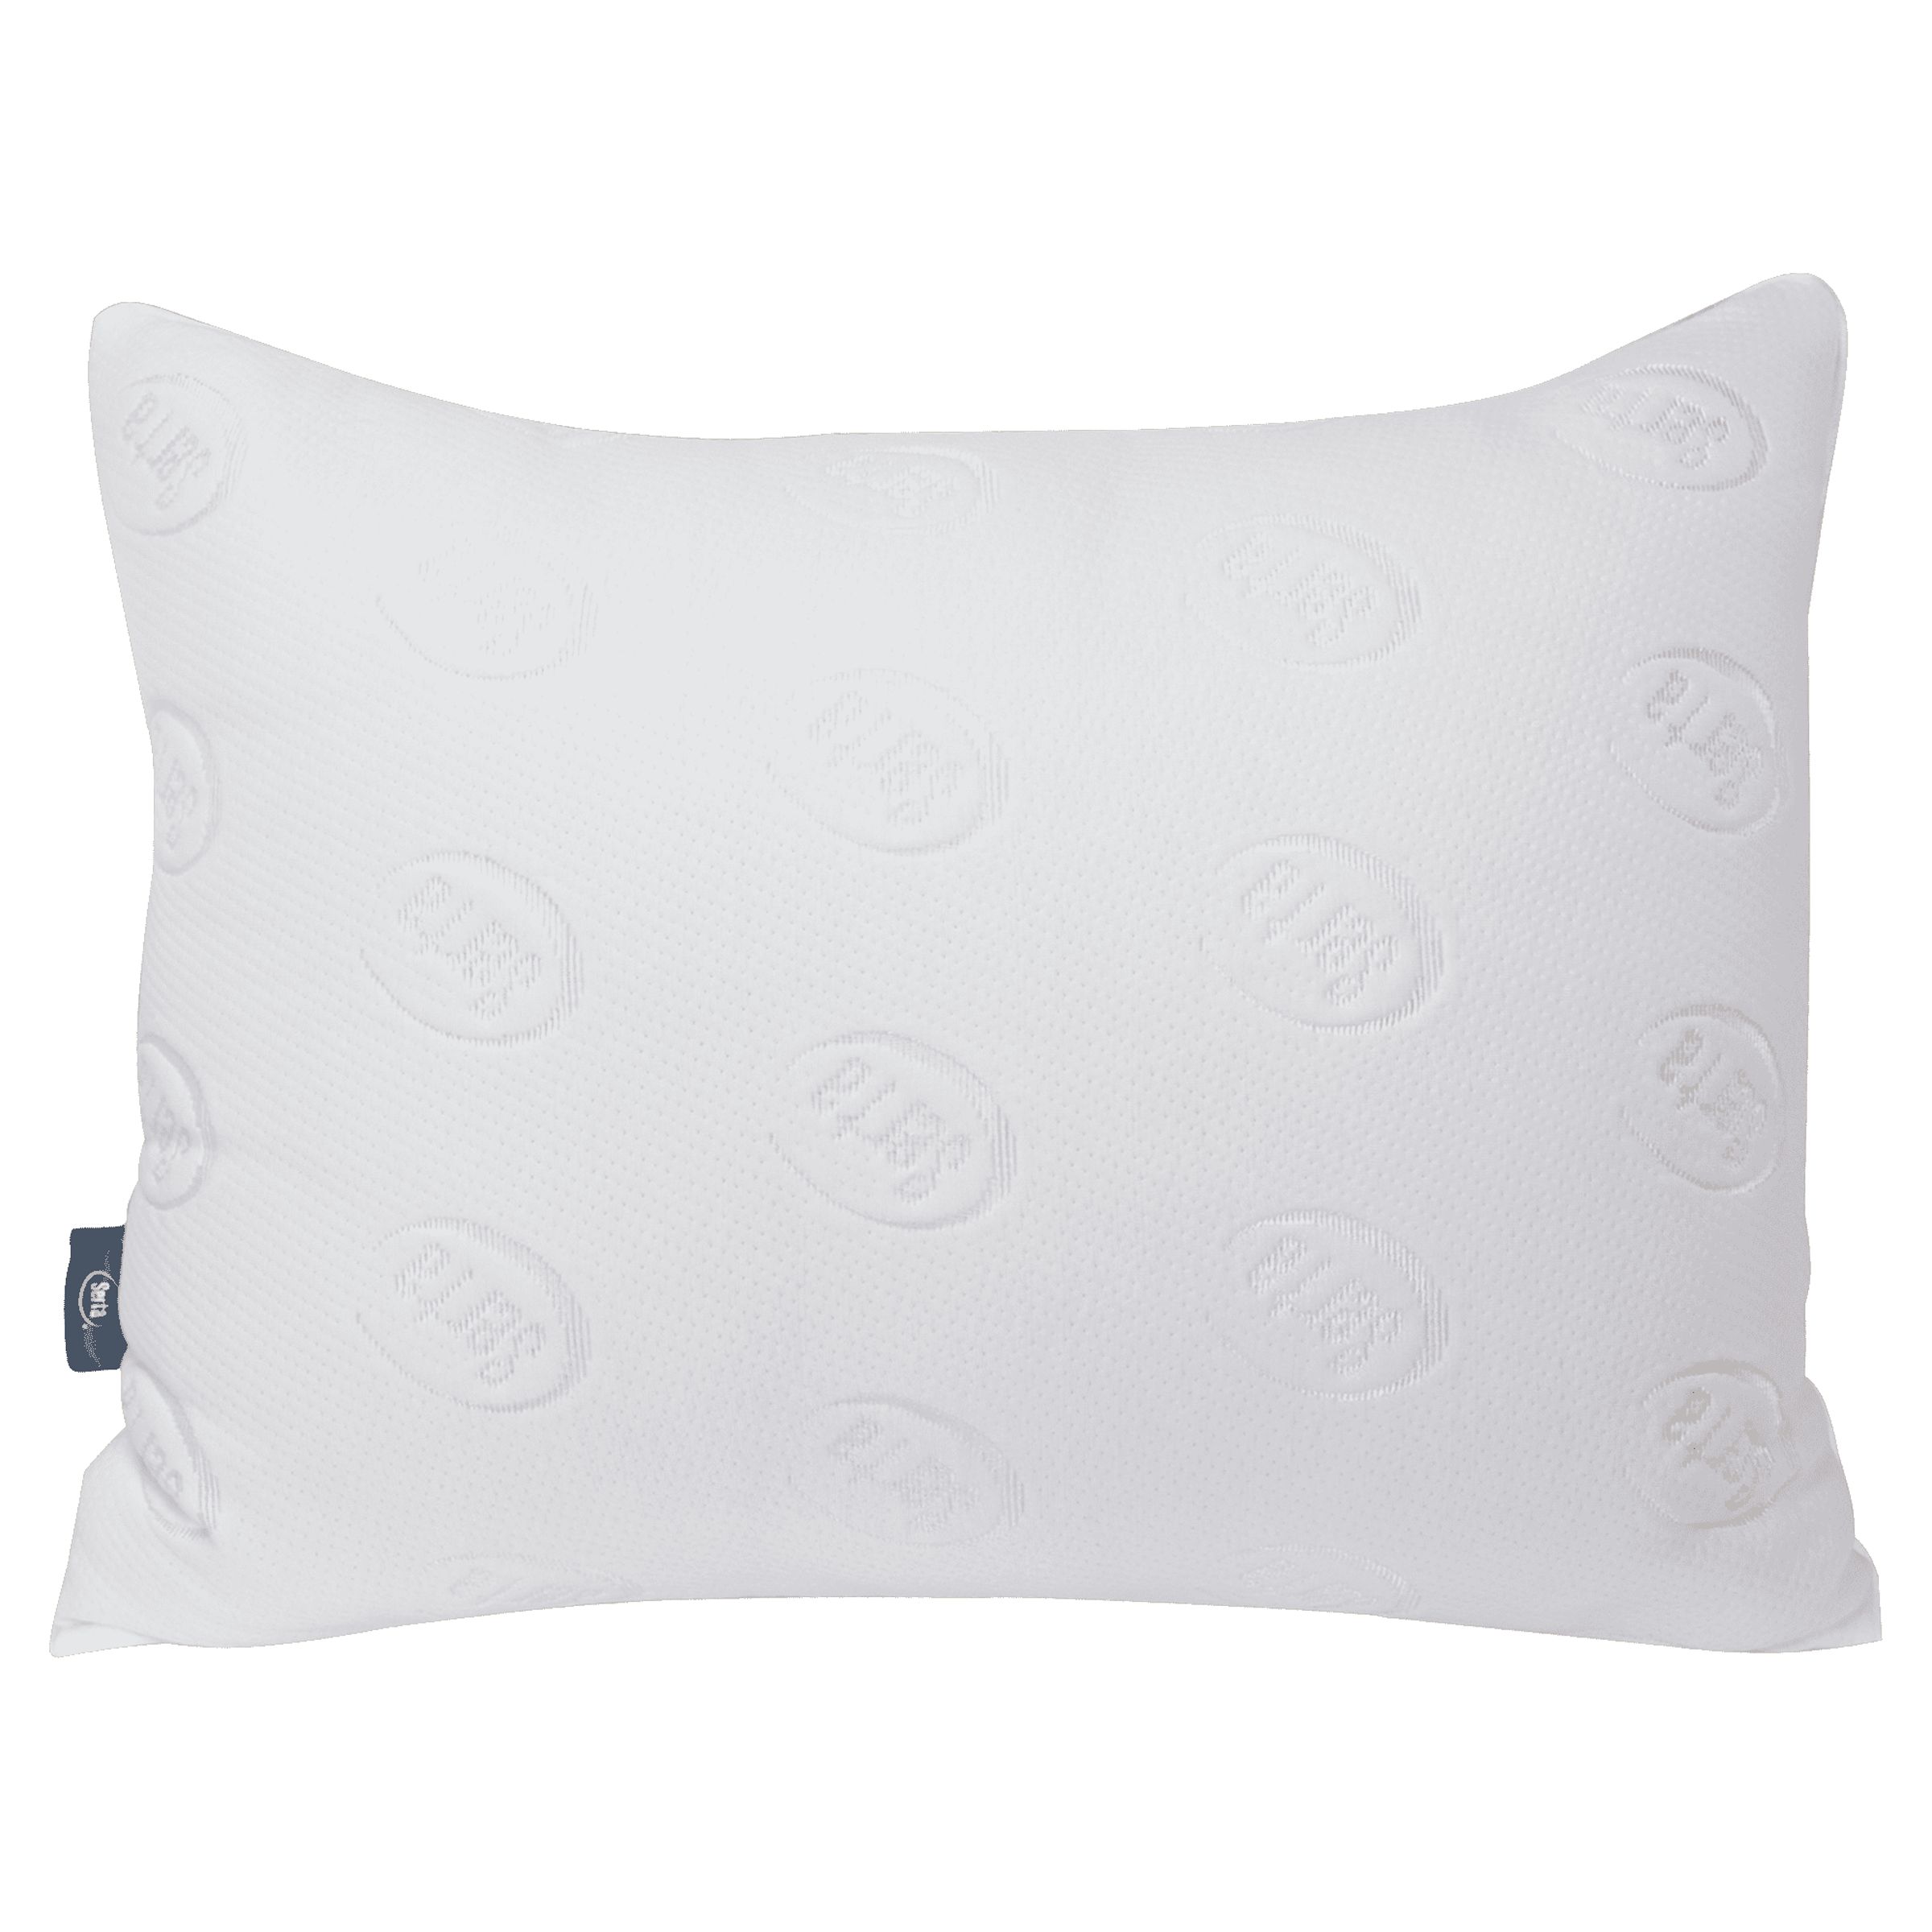 Serta So Fluffy Bed Pillow, Standard (2021 Version) - image 5 of 5